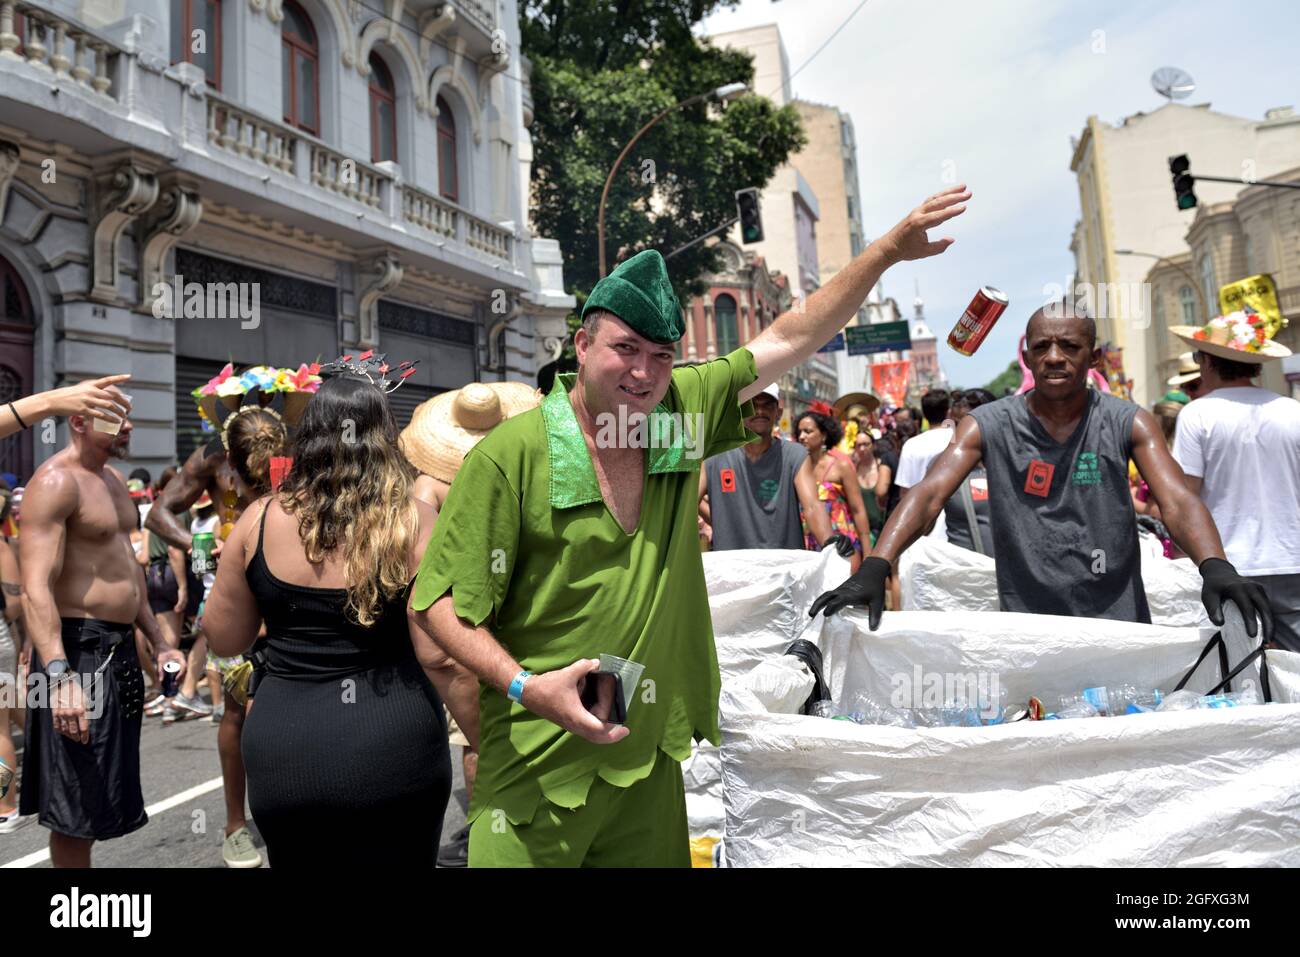 February 16, 2020: Can and plastic bottles recycling program during street Carnival parades in Rio de Janeiro.Man in costume contributes to recycling. Stock Photo